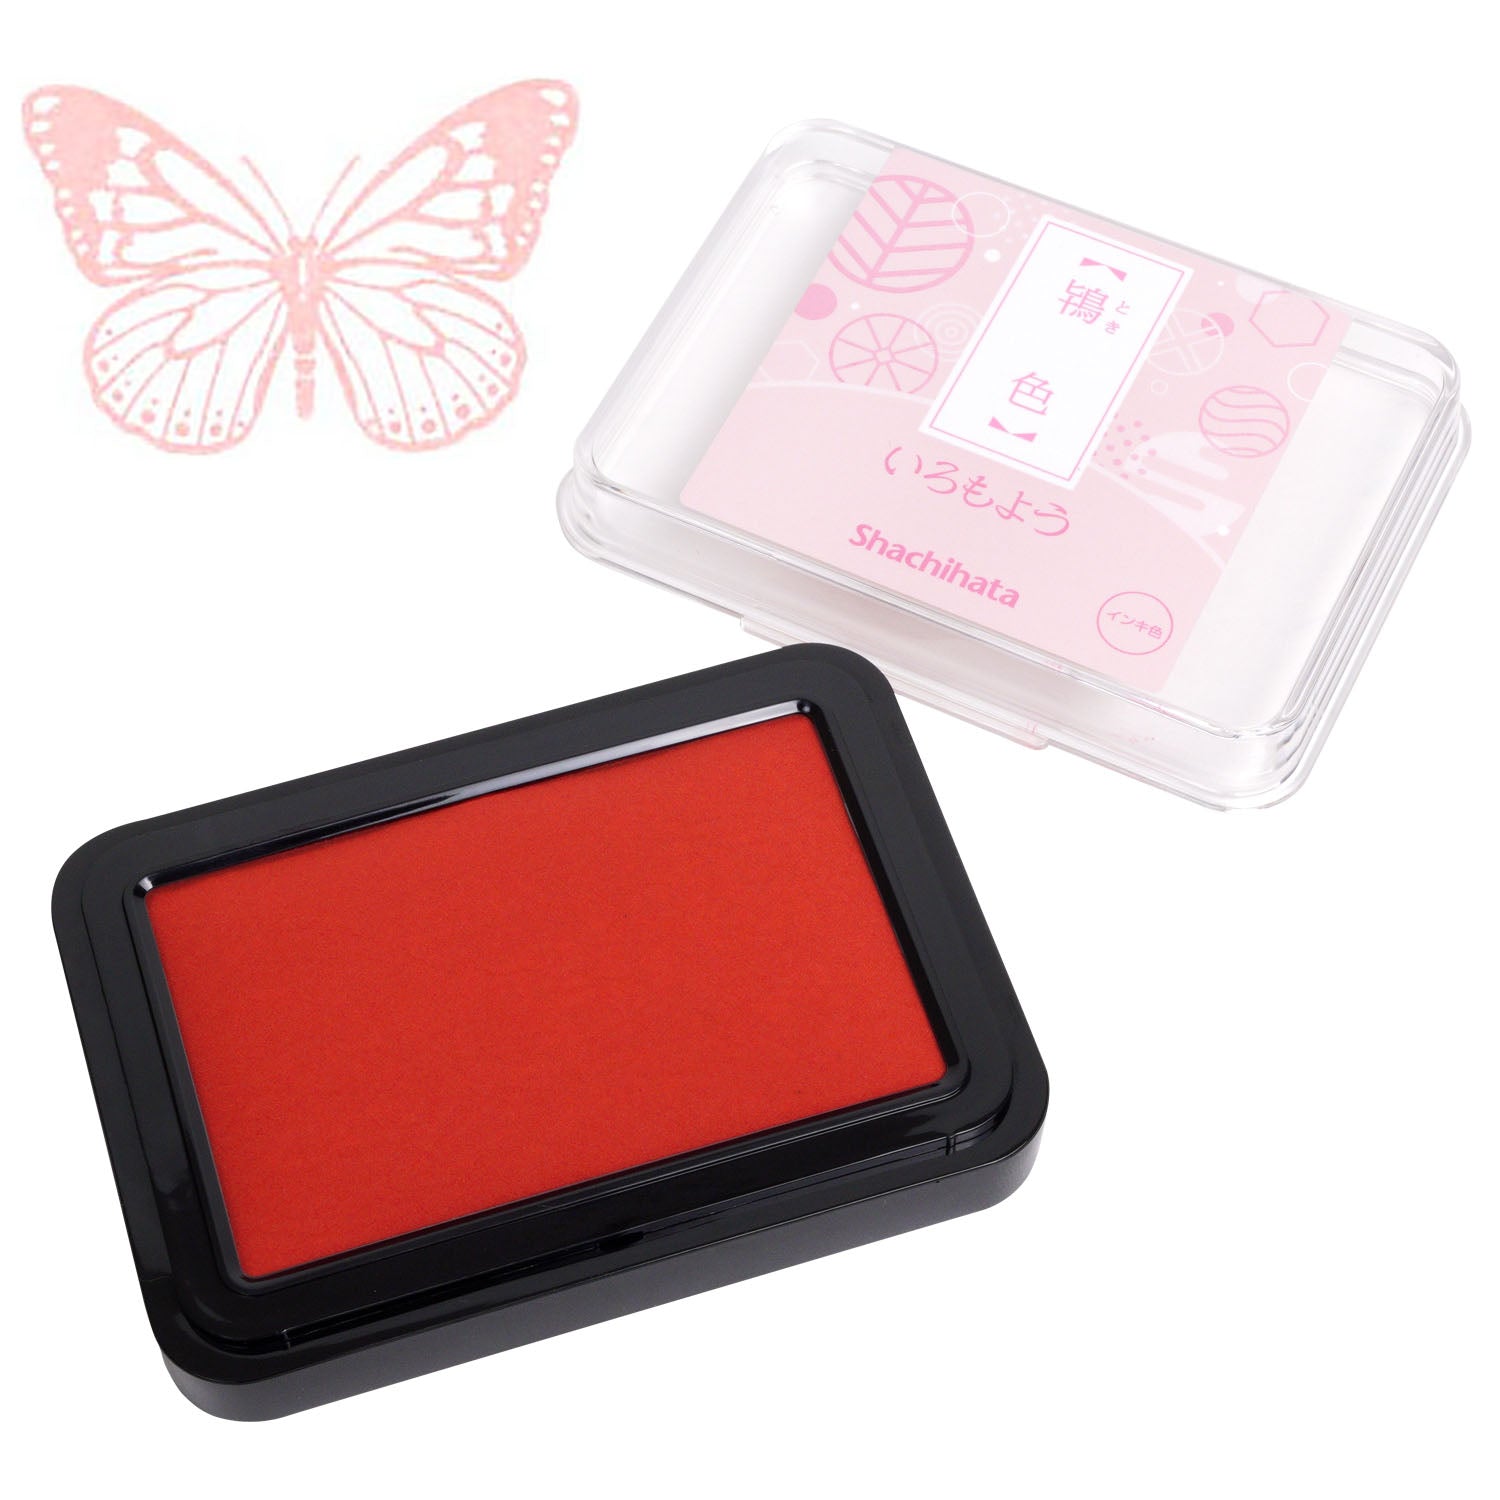 SHACHIHATA Iromoyou Stamp Pad HAC-1 Pale Pink